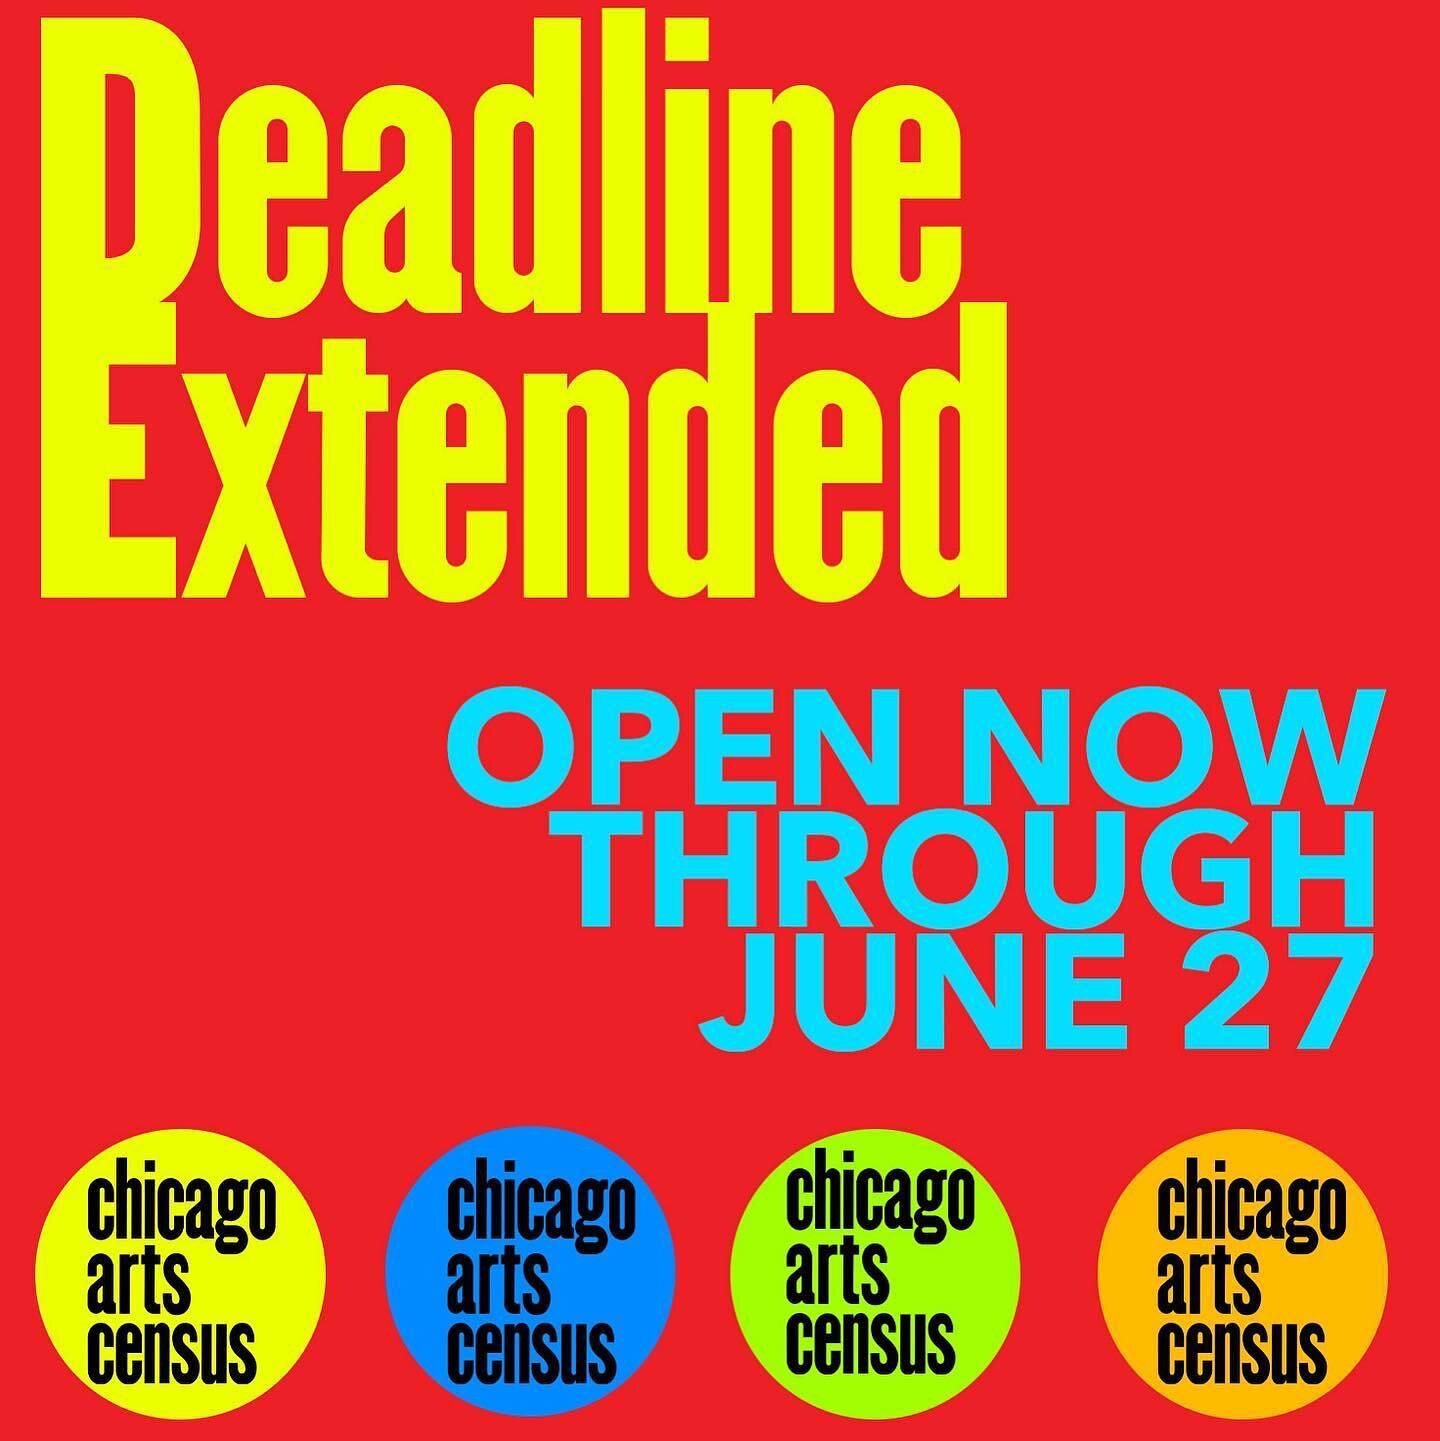 The Deadline has been Extended! The Chicago Arts Census is open Now through June 27th! Get Counted! 

Yes, indeed it is. Even a half completed survey is helpful! We need that data, coupled with your stories, to hold those in power accountable, speak 